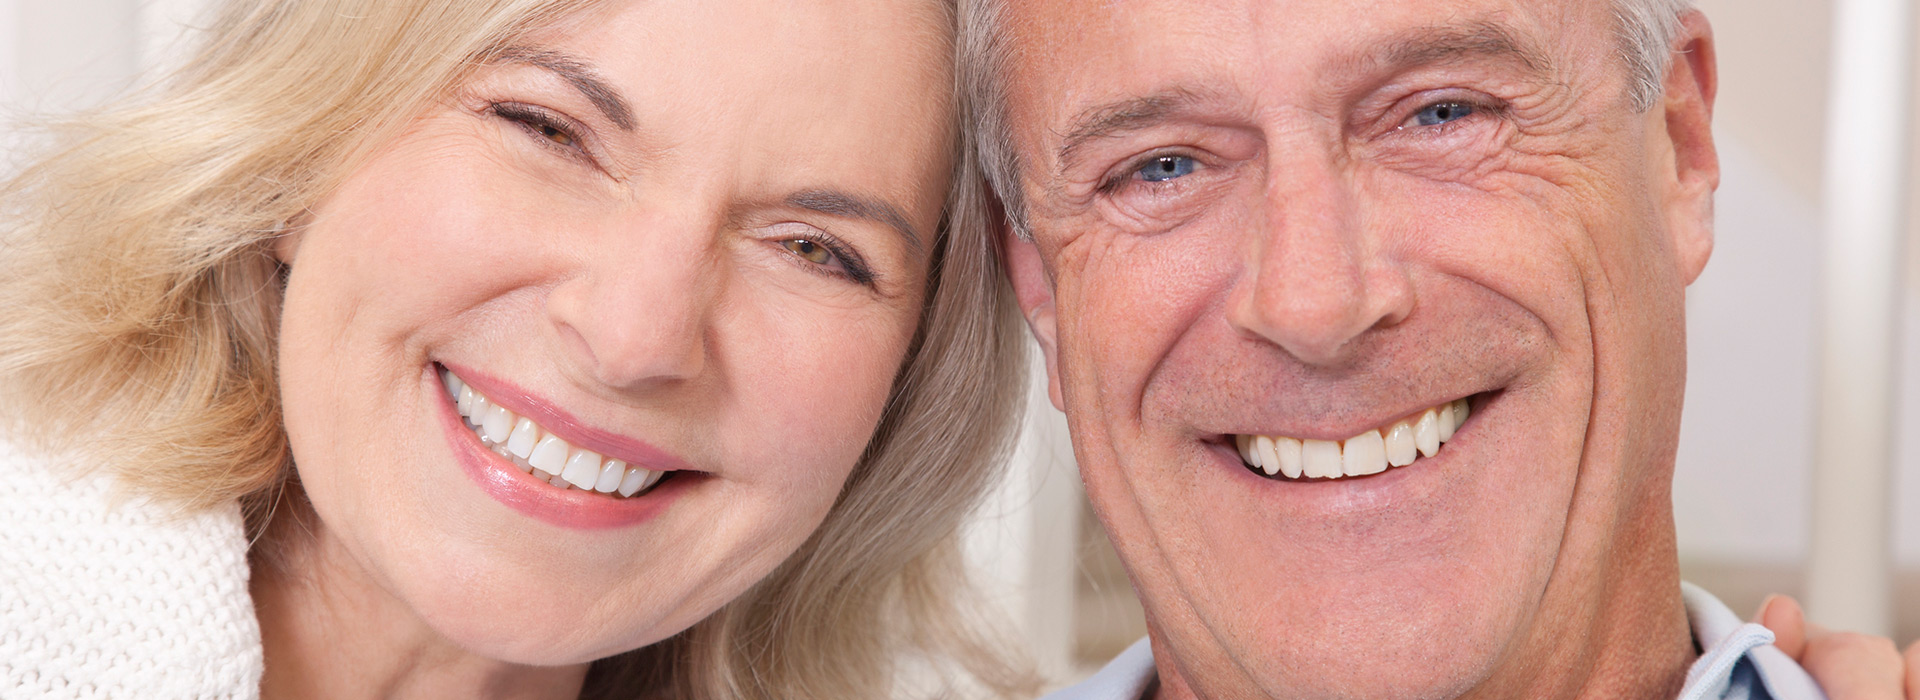 A couple after full mouth reconstruction treatments.